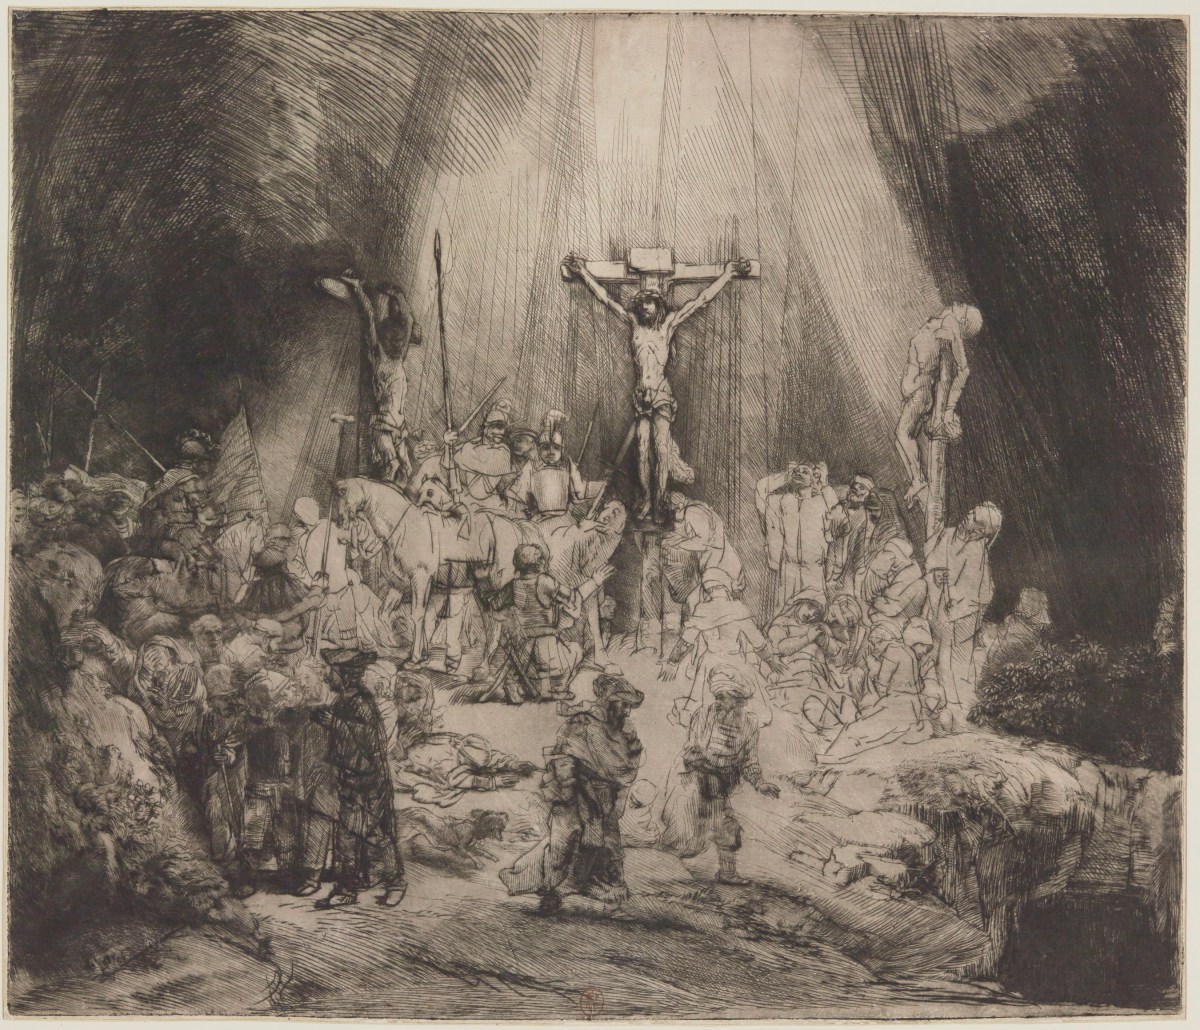 CHRIST CRUCIFIED BETWEEN THE TWO THIEVES, THE THREE CROSSES